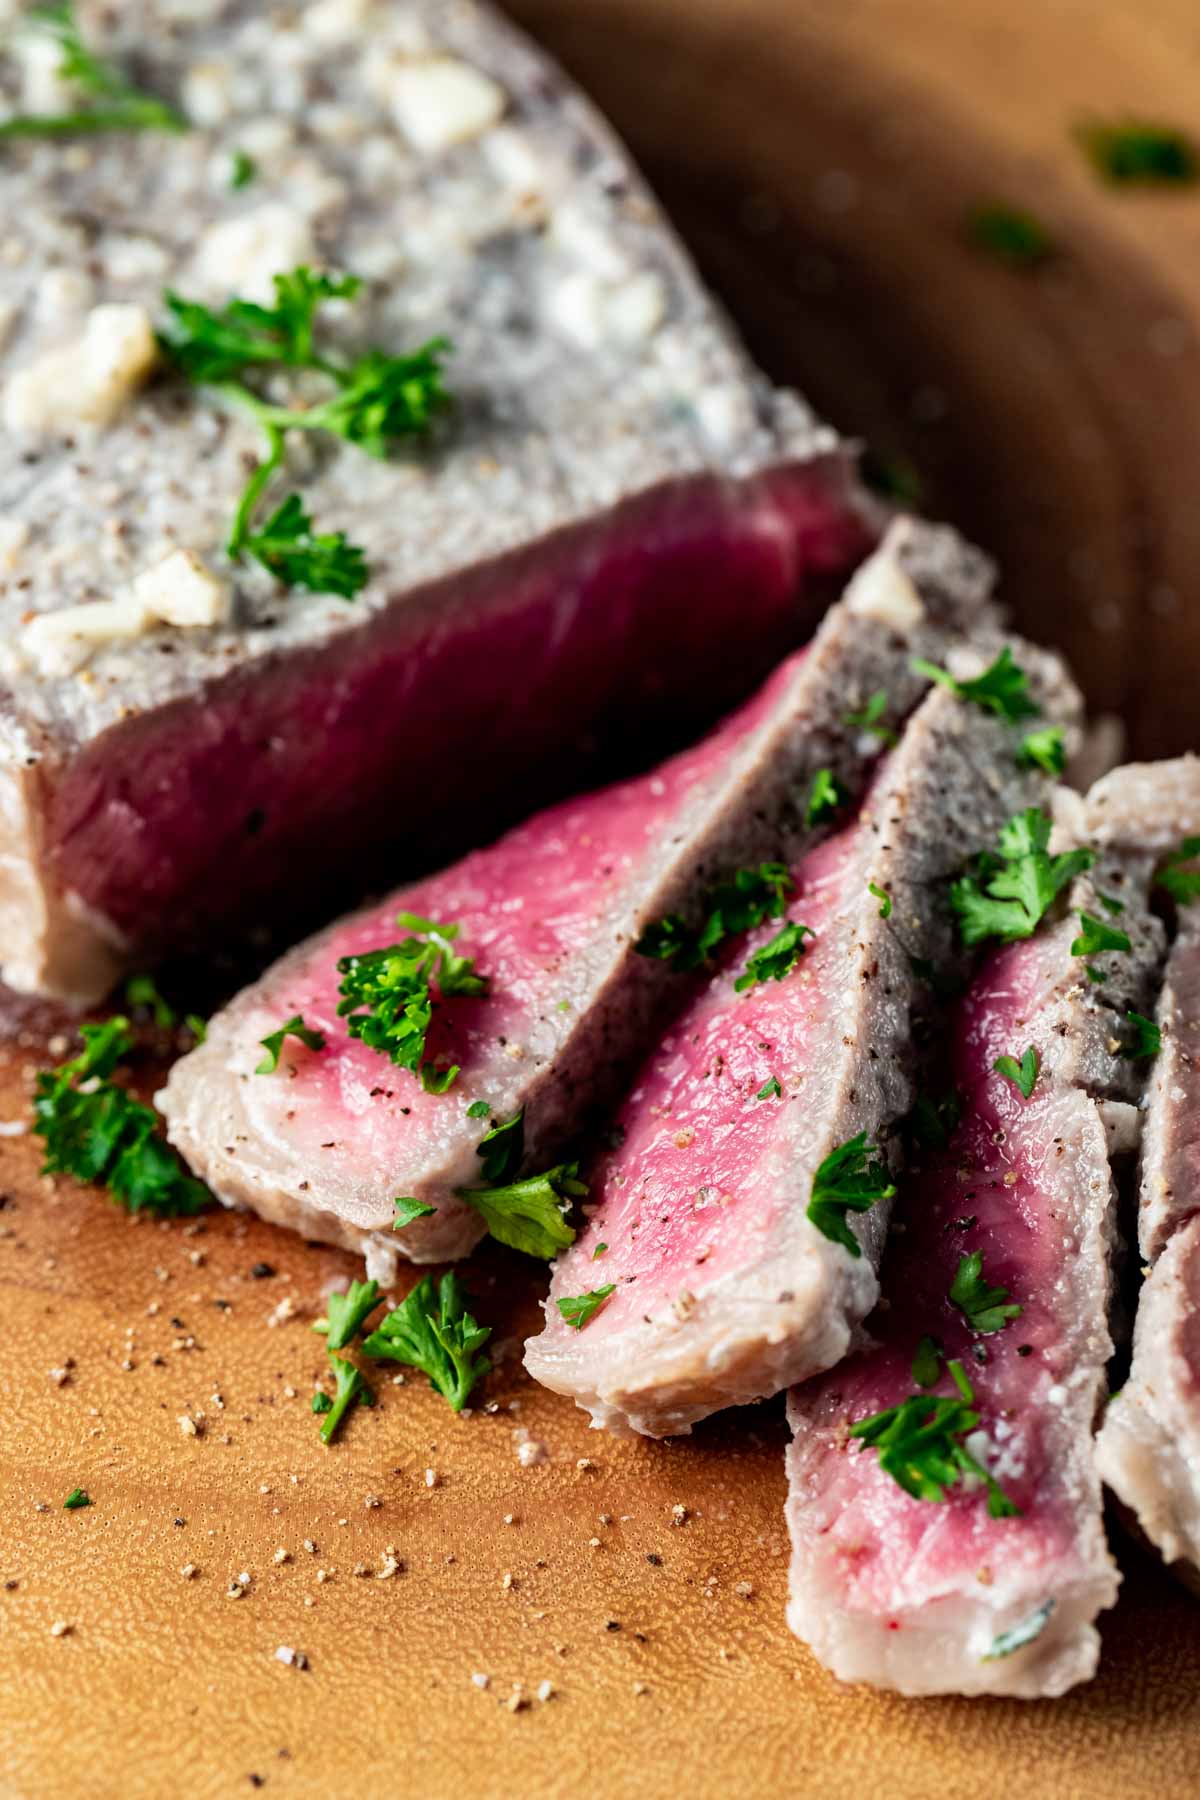 Close up view of milk steak cut into thin slices and garnished with chopped herbs.